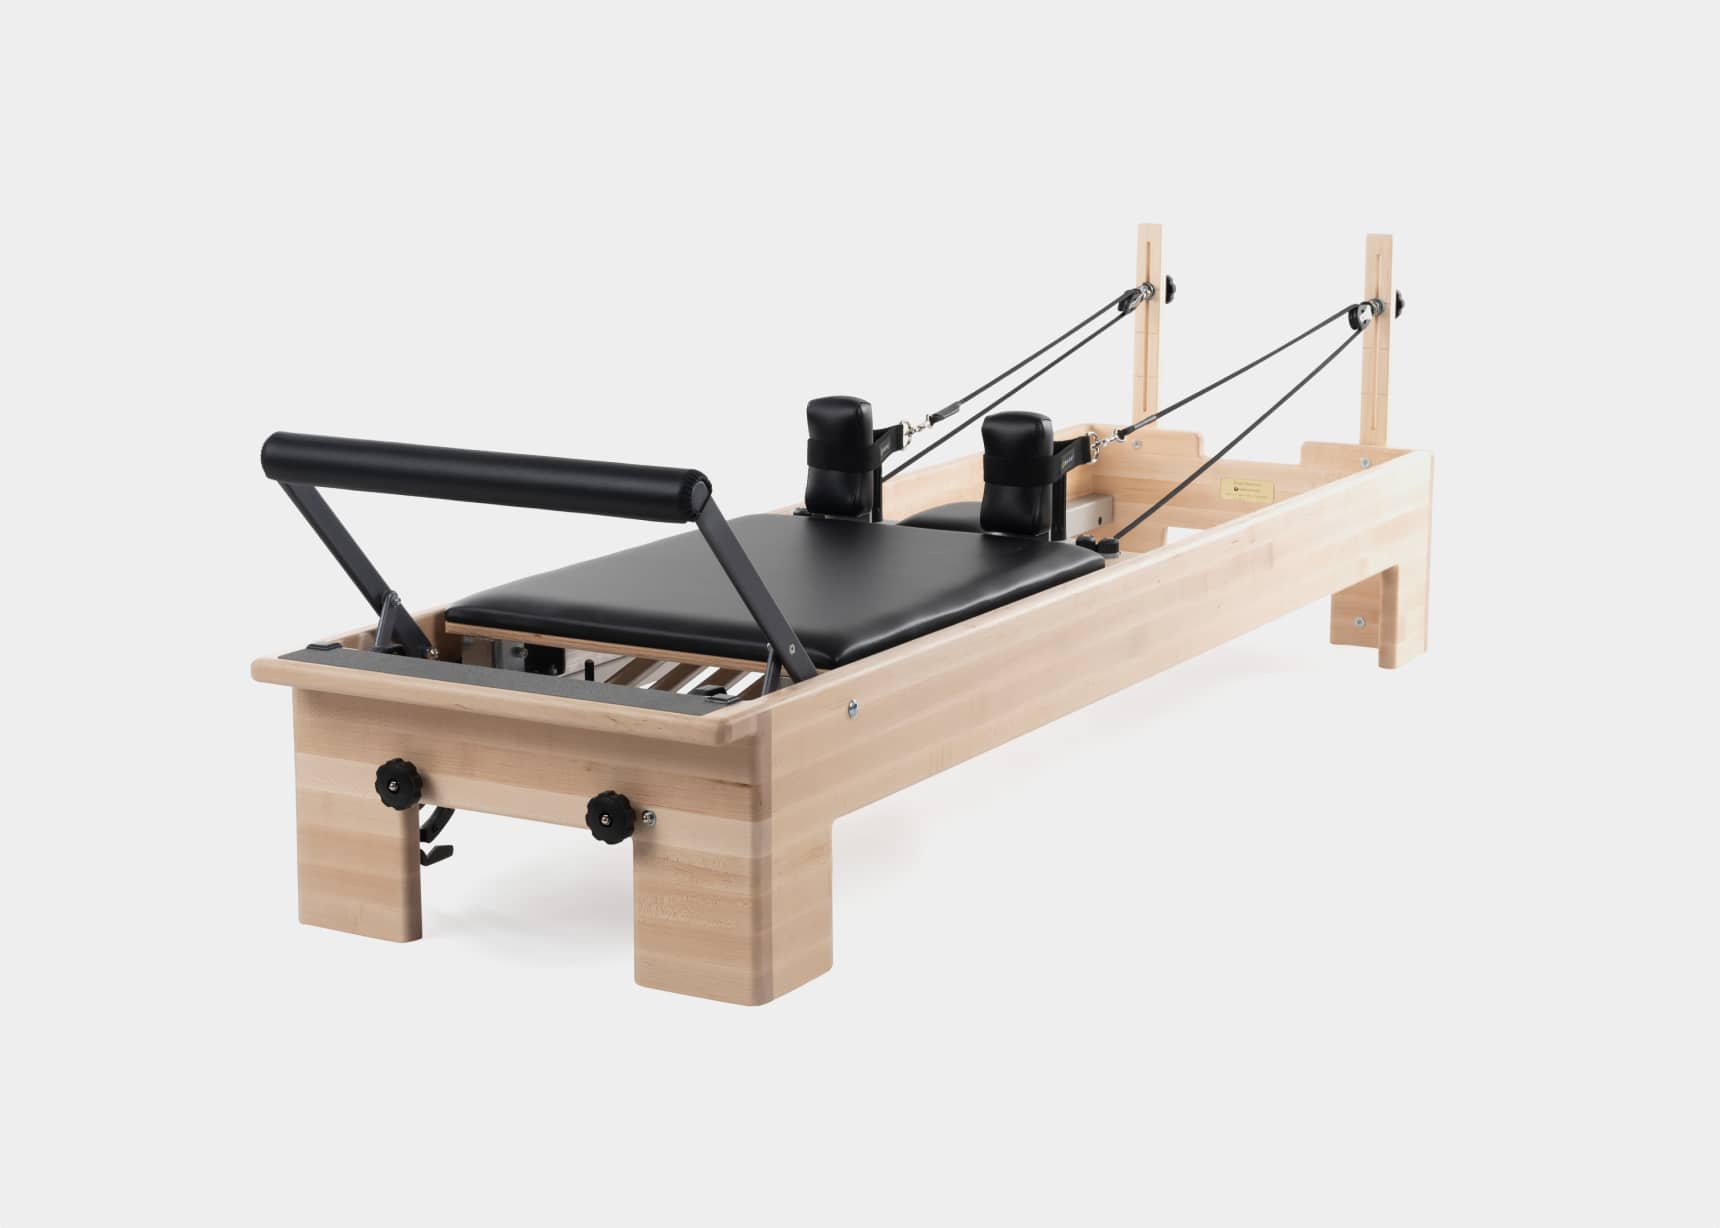  Pilates Core Bed, Fitness Equipment, Pilates Training Bed,  Stainless Steel Yoga Training Bed Pilates Machine,Pilates Reformer Machine  for Home,Balanced Body Reformer,Yoga Equipment for Home Workouts : Sports &  Outdoors